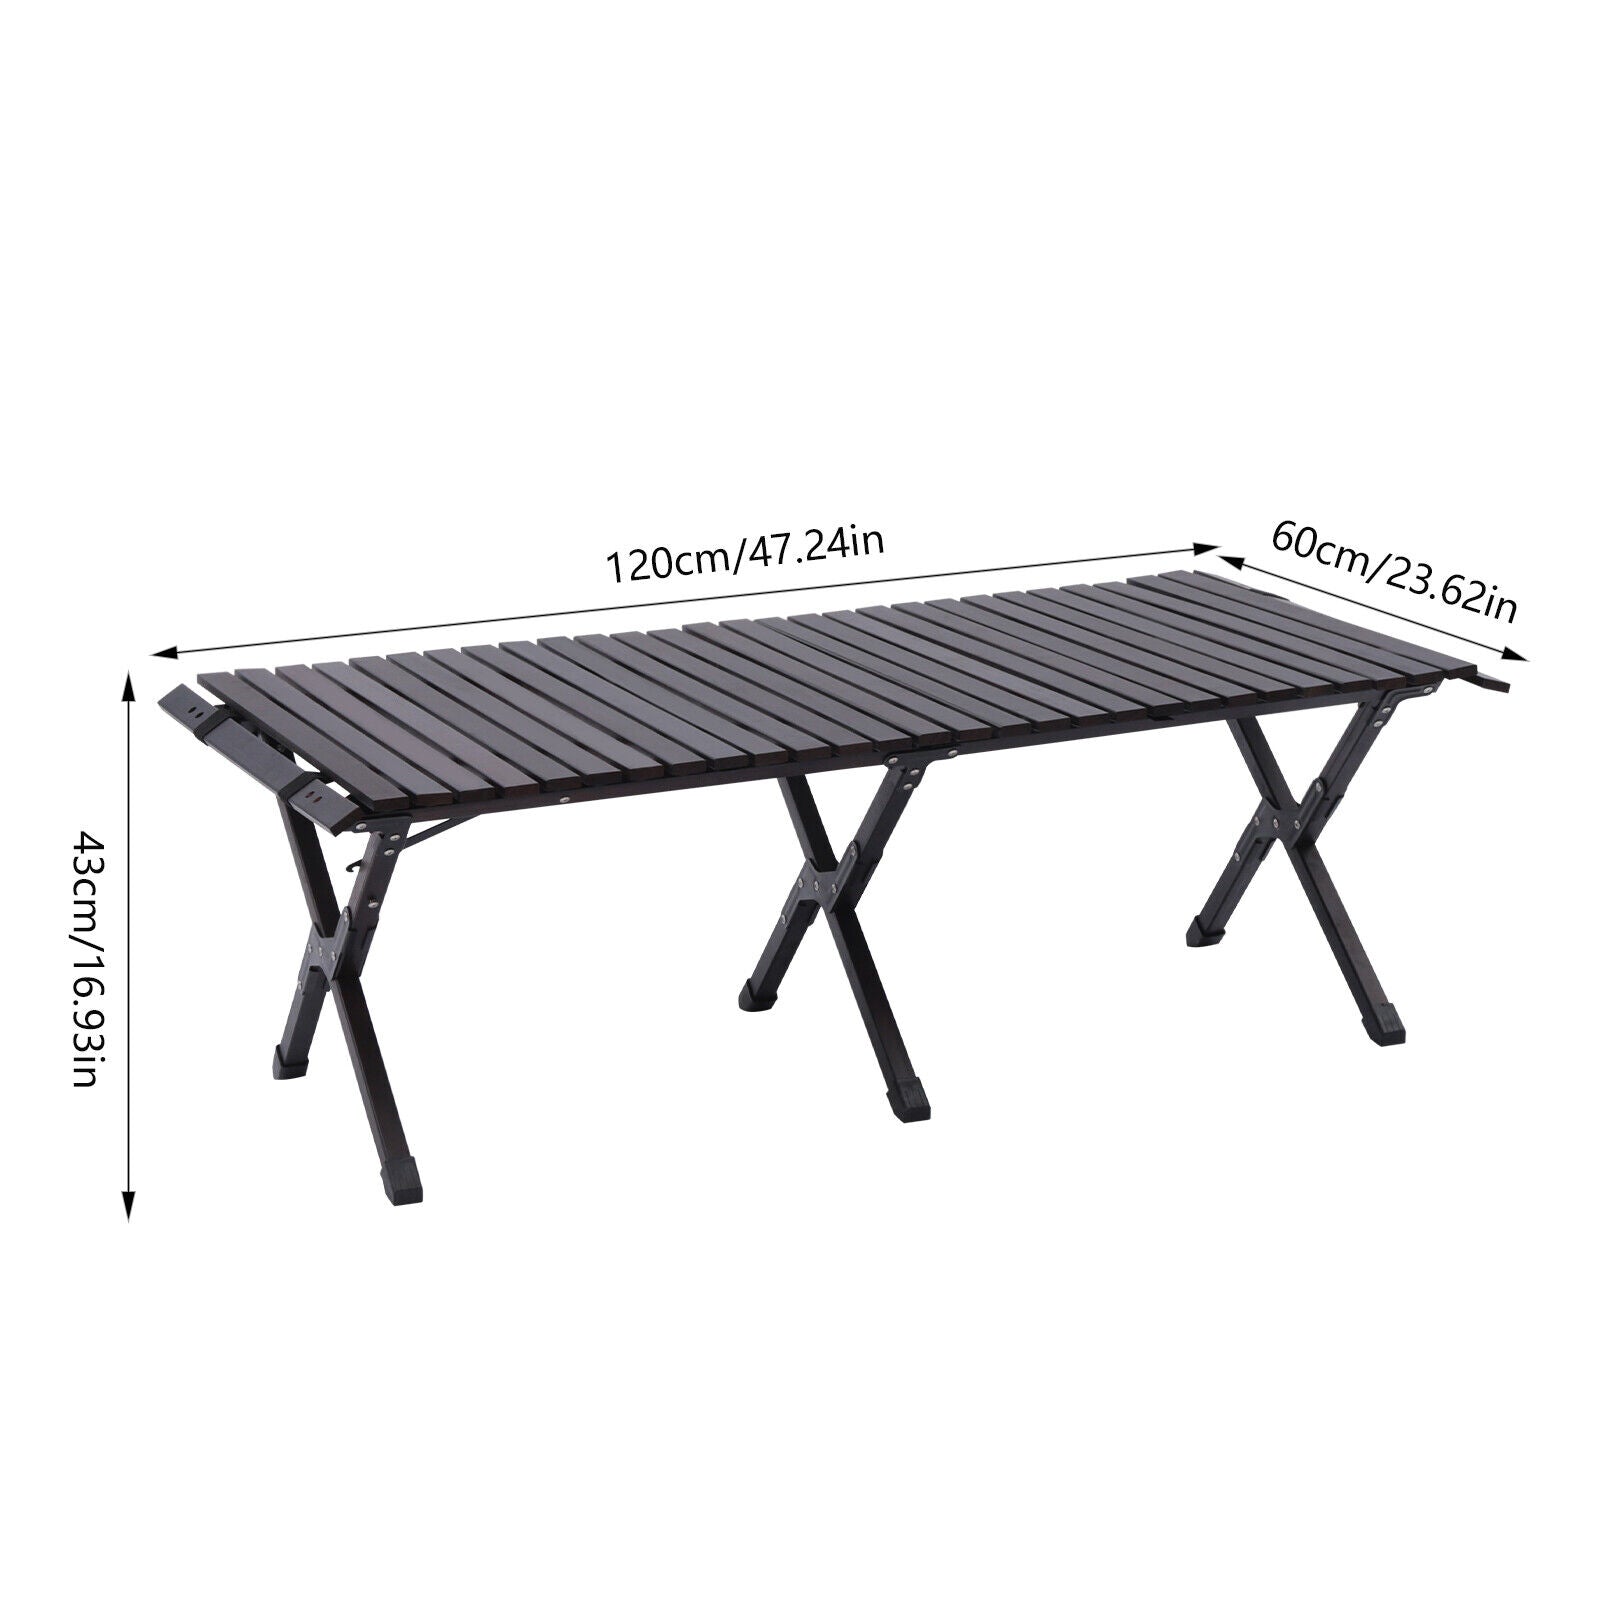 Portable Wood Picnic and Camping Foldable Table Travel Easy Assemble and Carry Outdoor Portable Folding Lightweight Camping Picnic Table Easy Assemble and Carry Anti-slip Leg Cover Folding Picnic Table